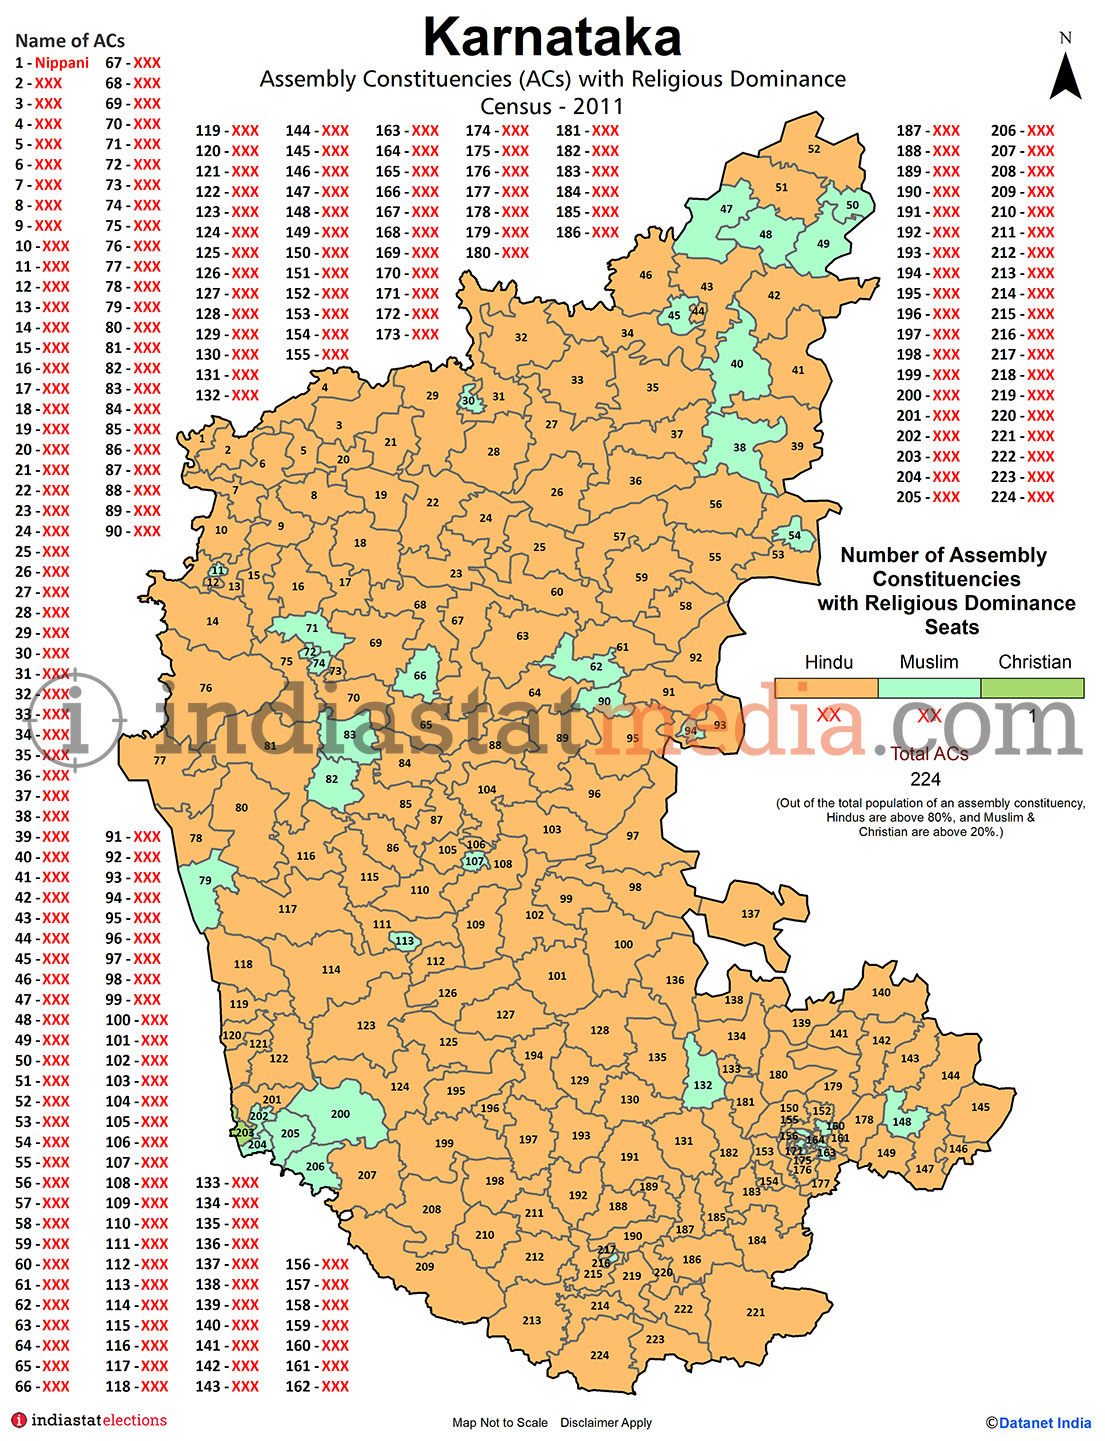 Assembly Constituencies (ACs) with Religious Dominance in Karnataka - Census 2011